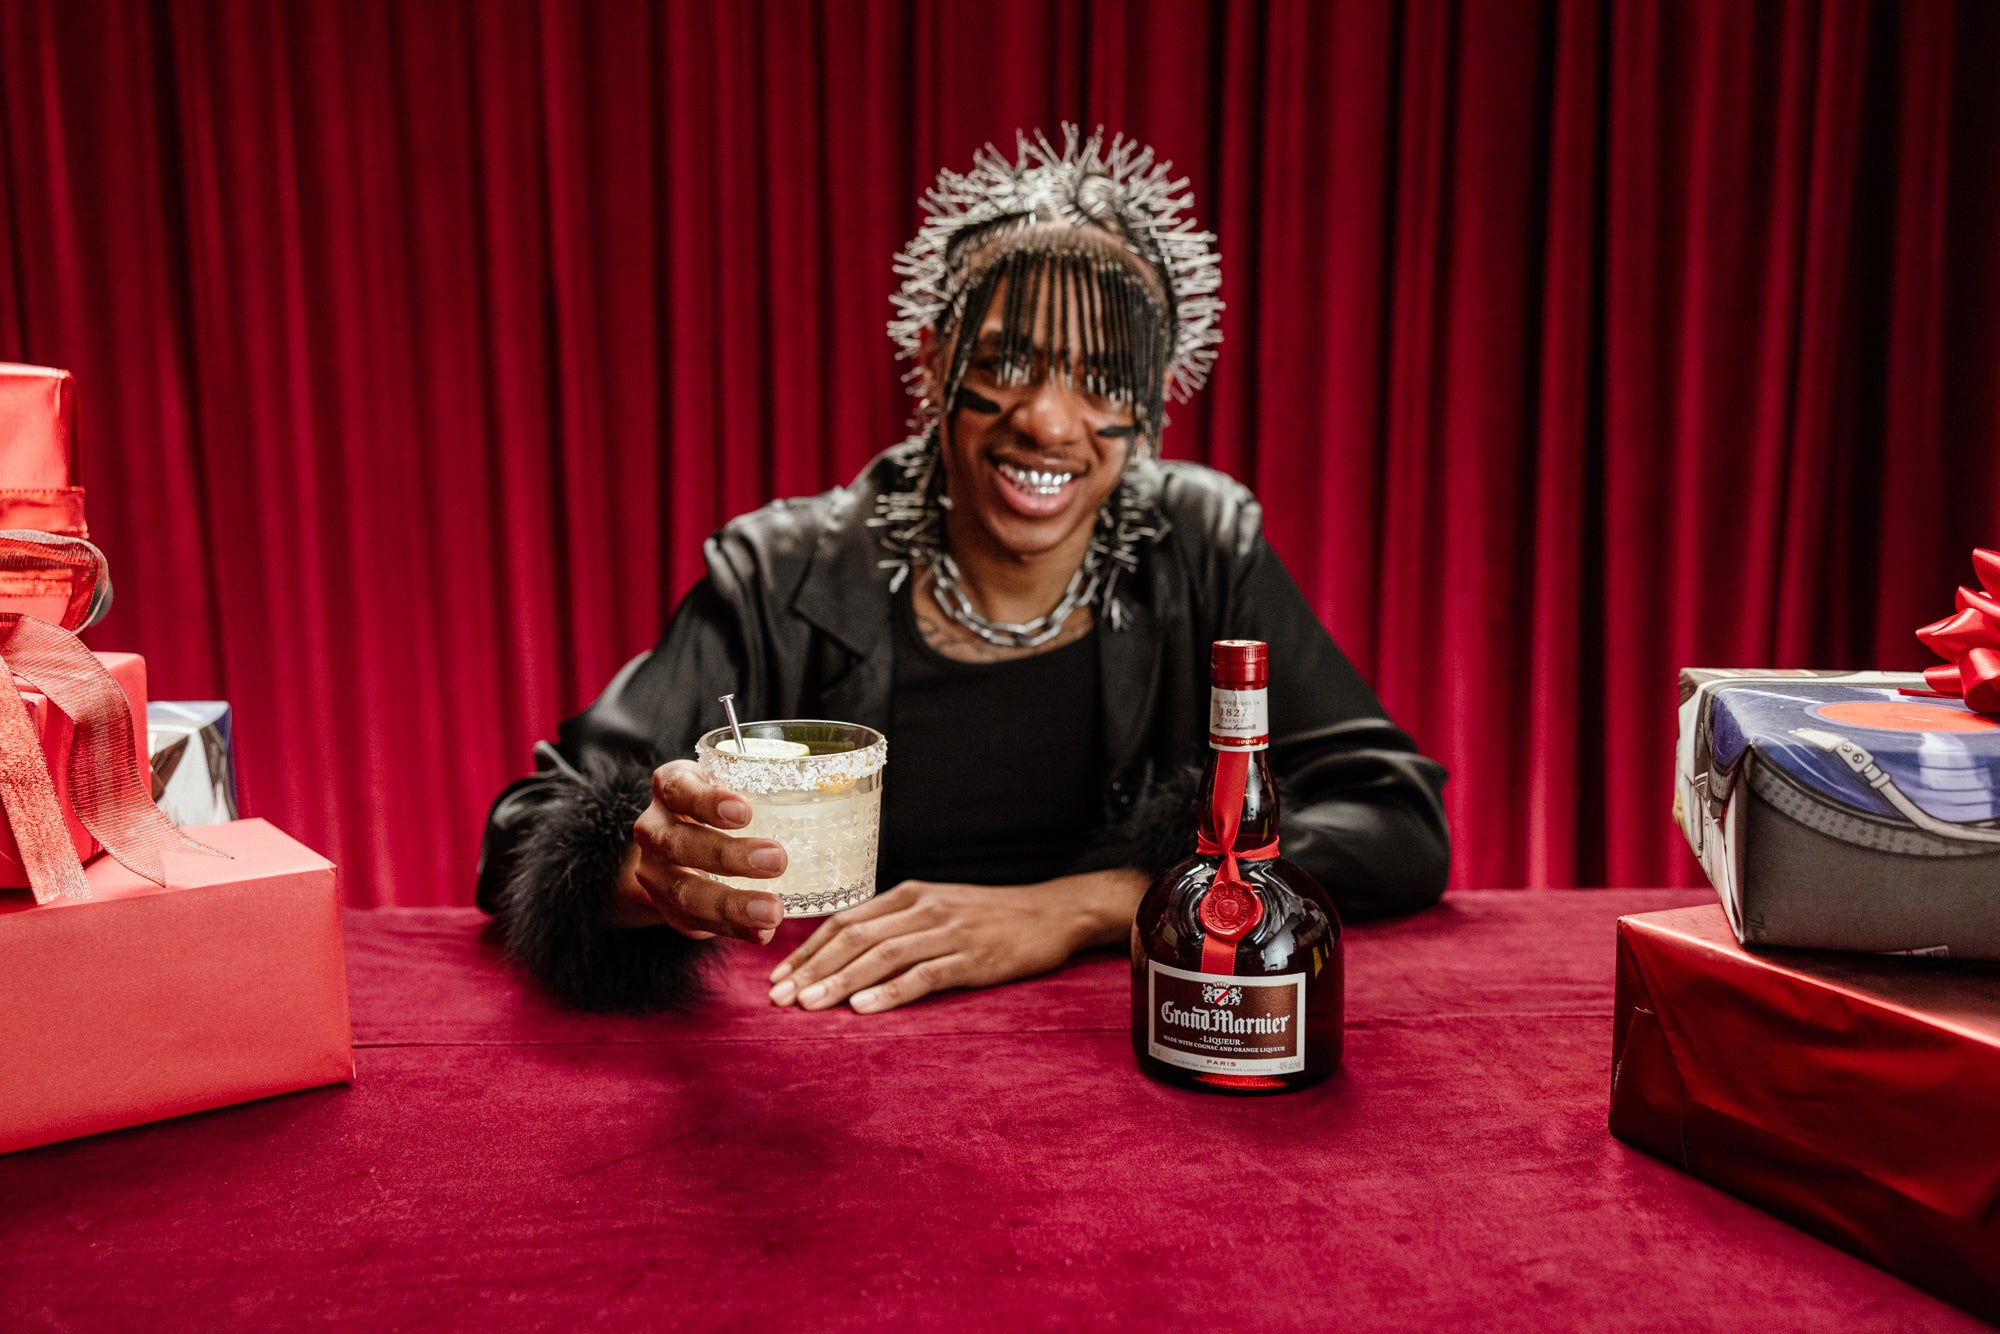 Teezo Touchdown Is Bringing Holiday Cheer With Grand Marnier